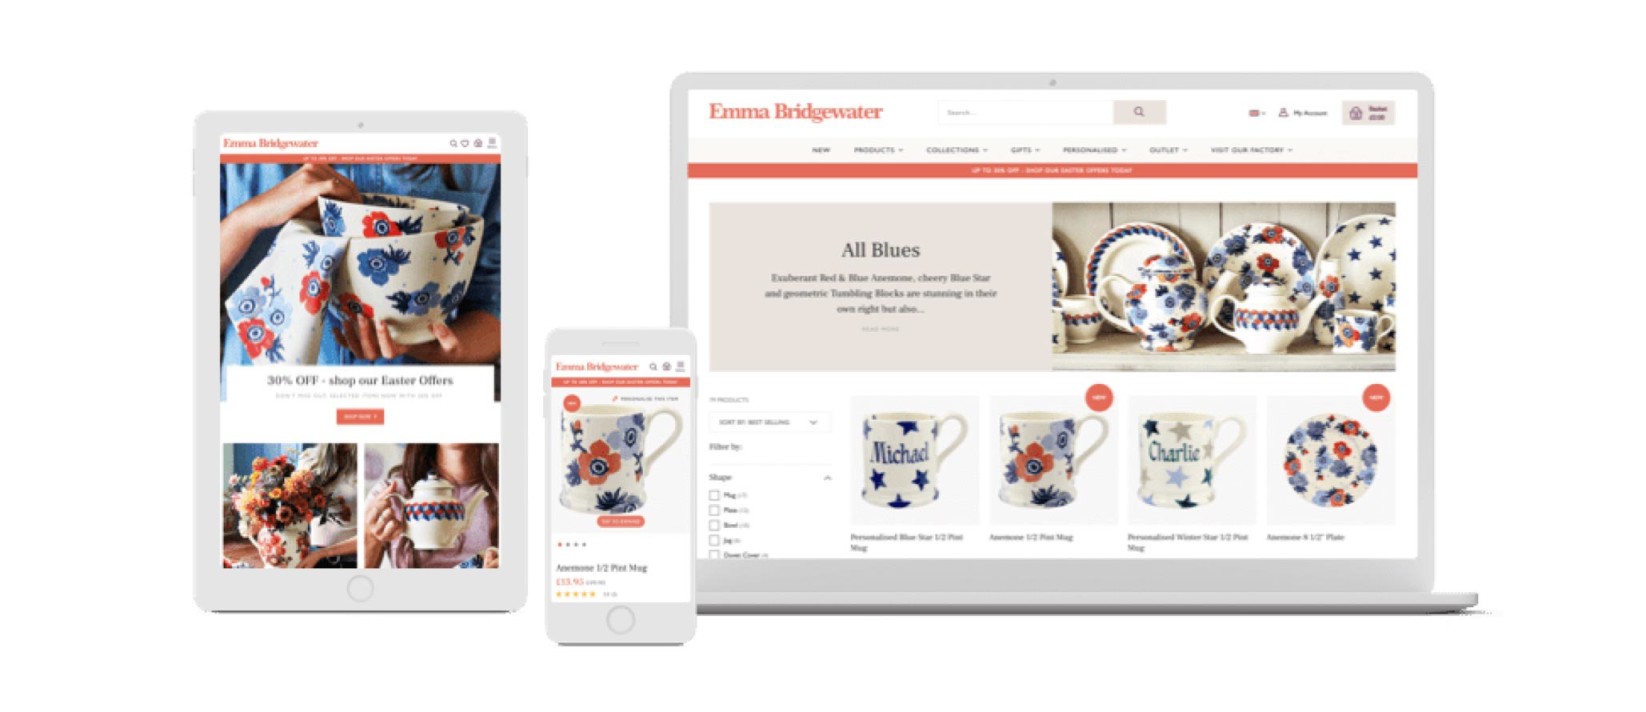 The Emma Bridgewater website, featuring colourful ceramic dishes and mugs, is displayed side-by-side on a tablet, smartphone, and laptop.